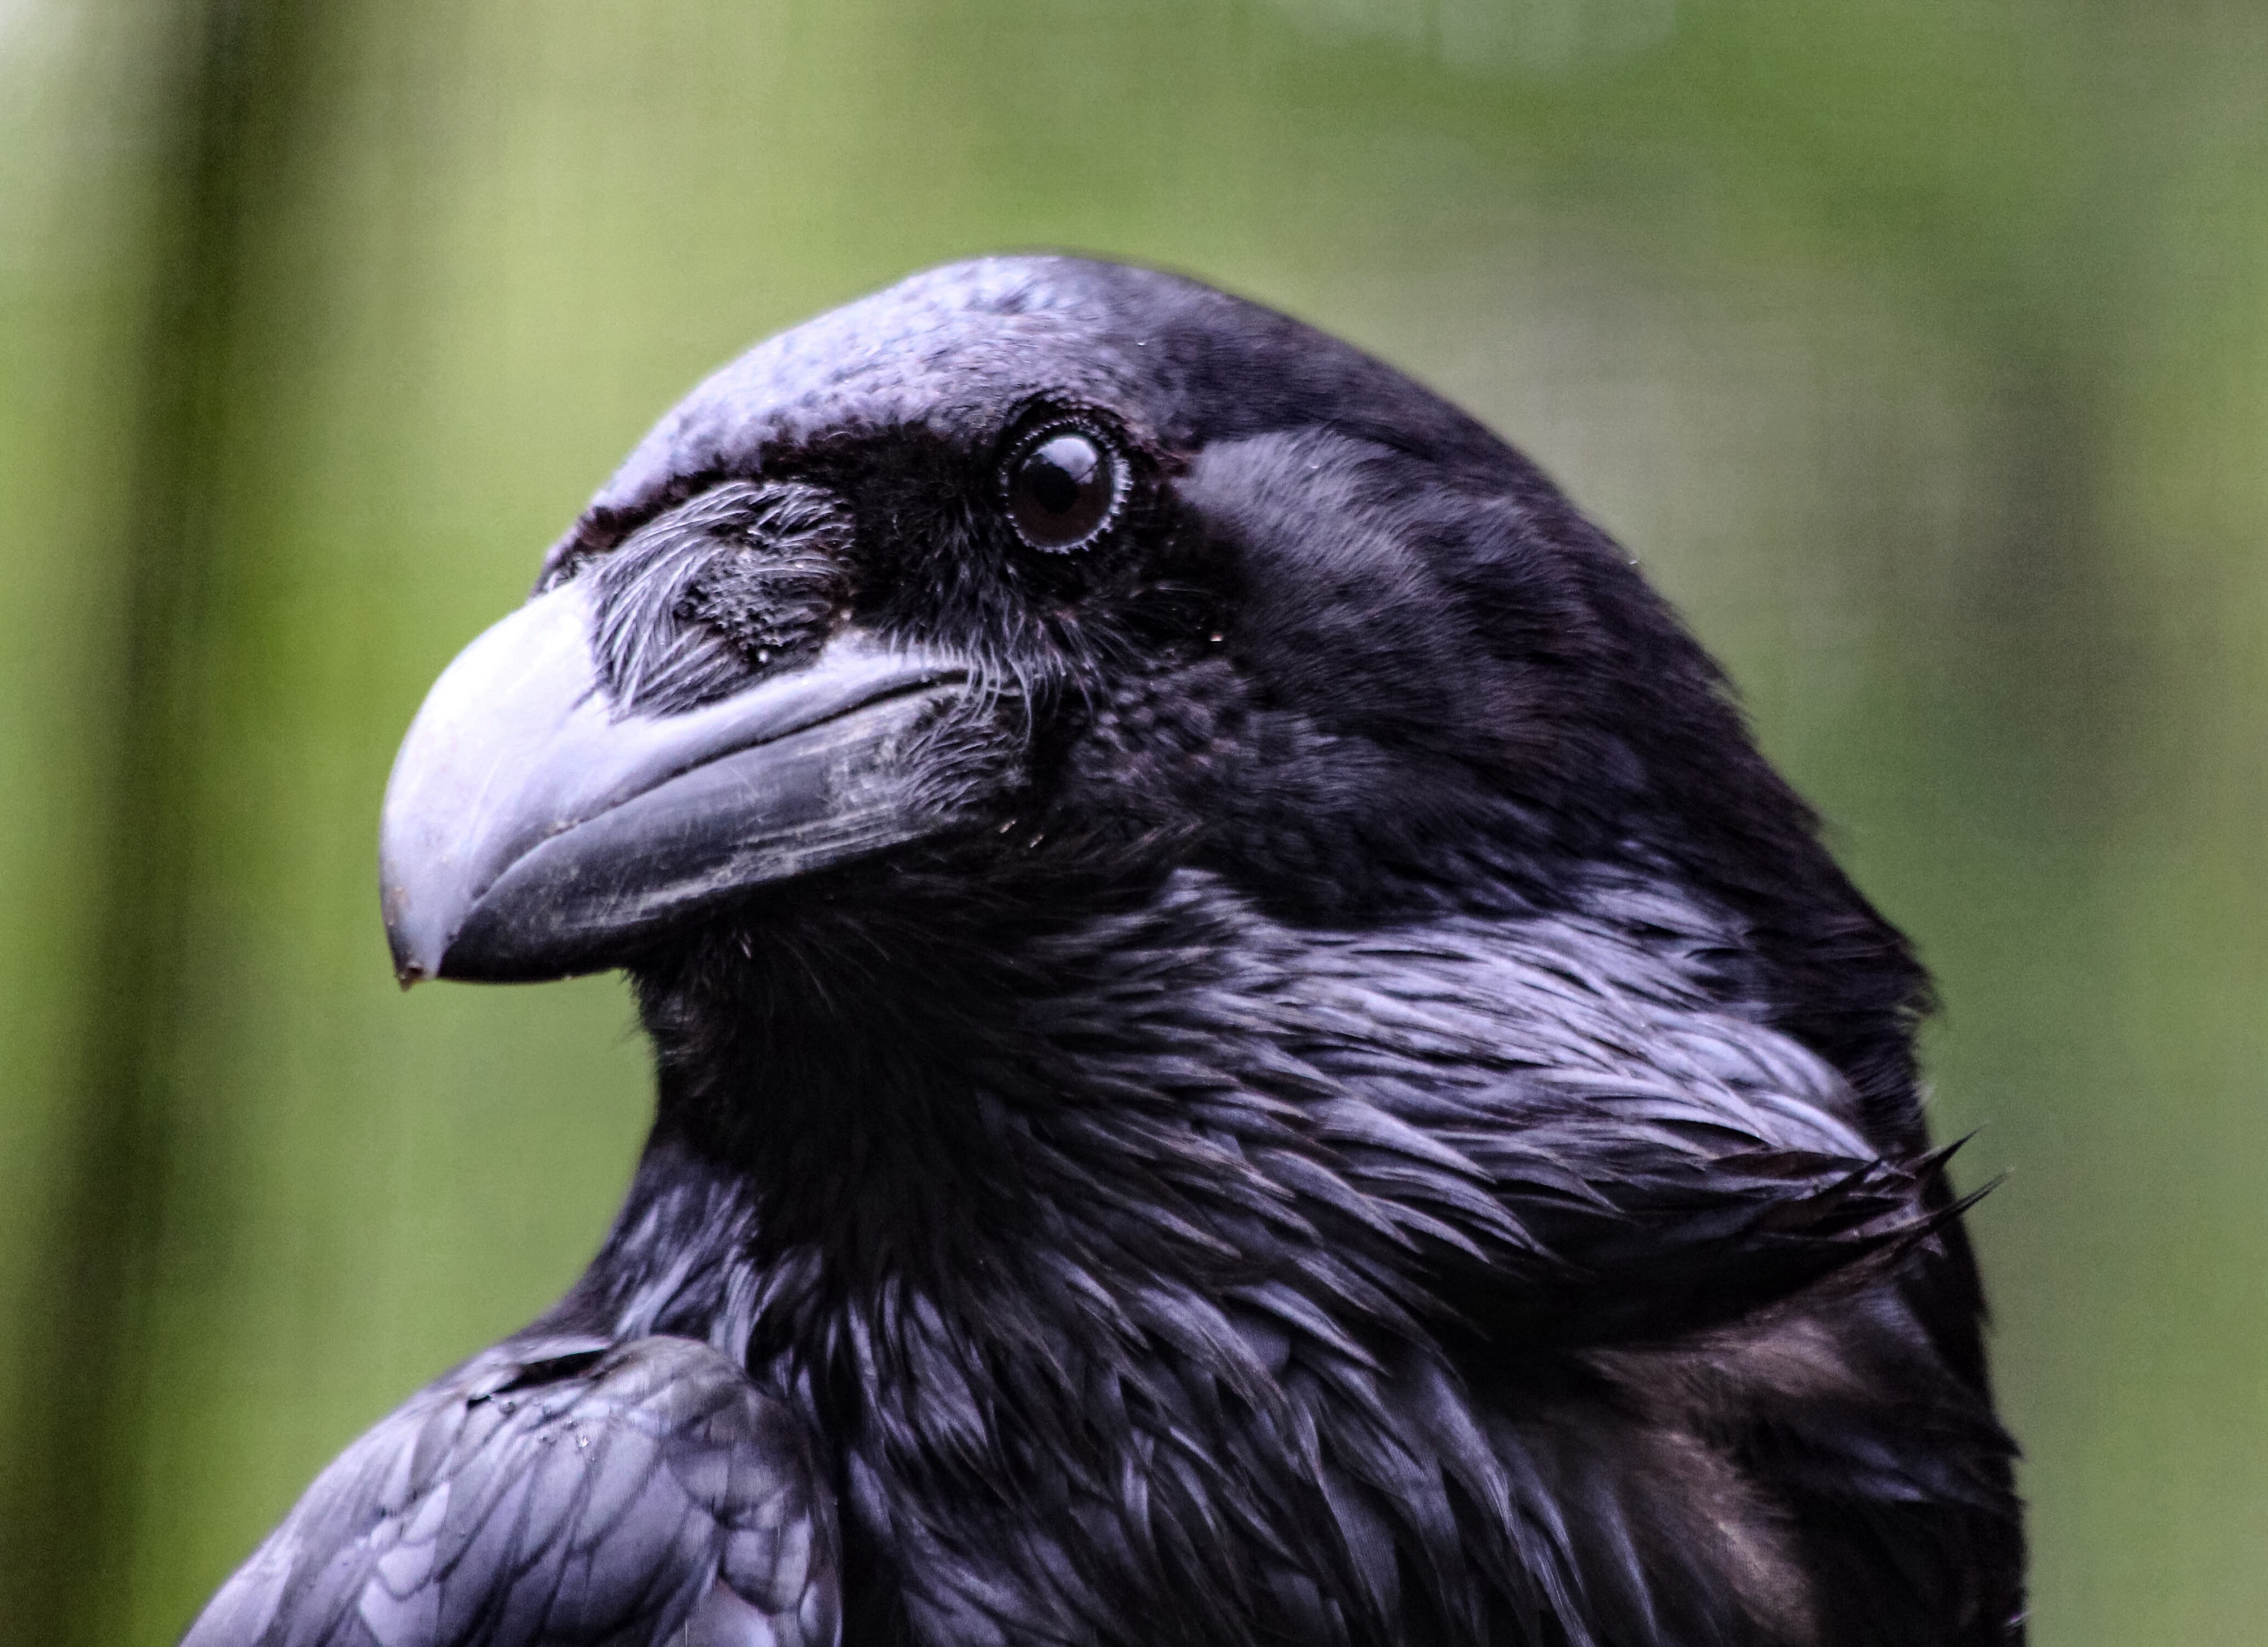 bird raven The Raven is watching... image by @sunsetschnubb